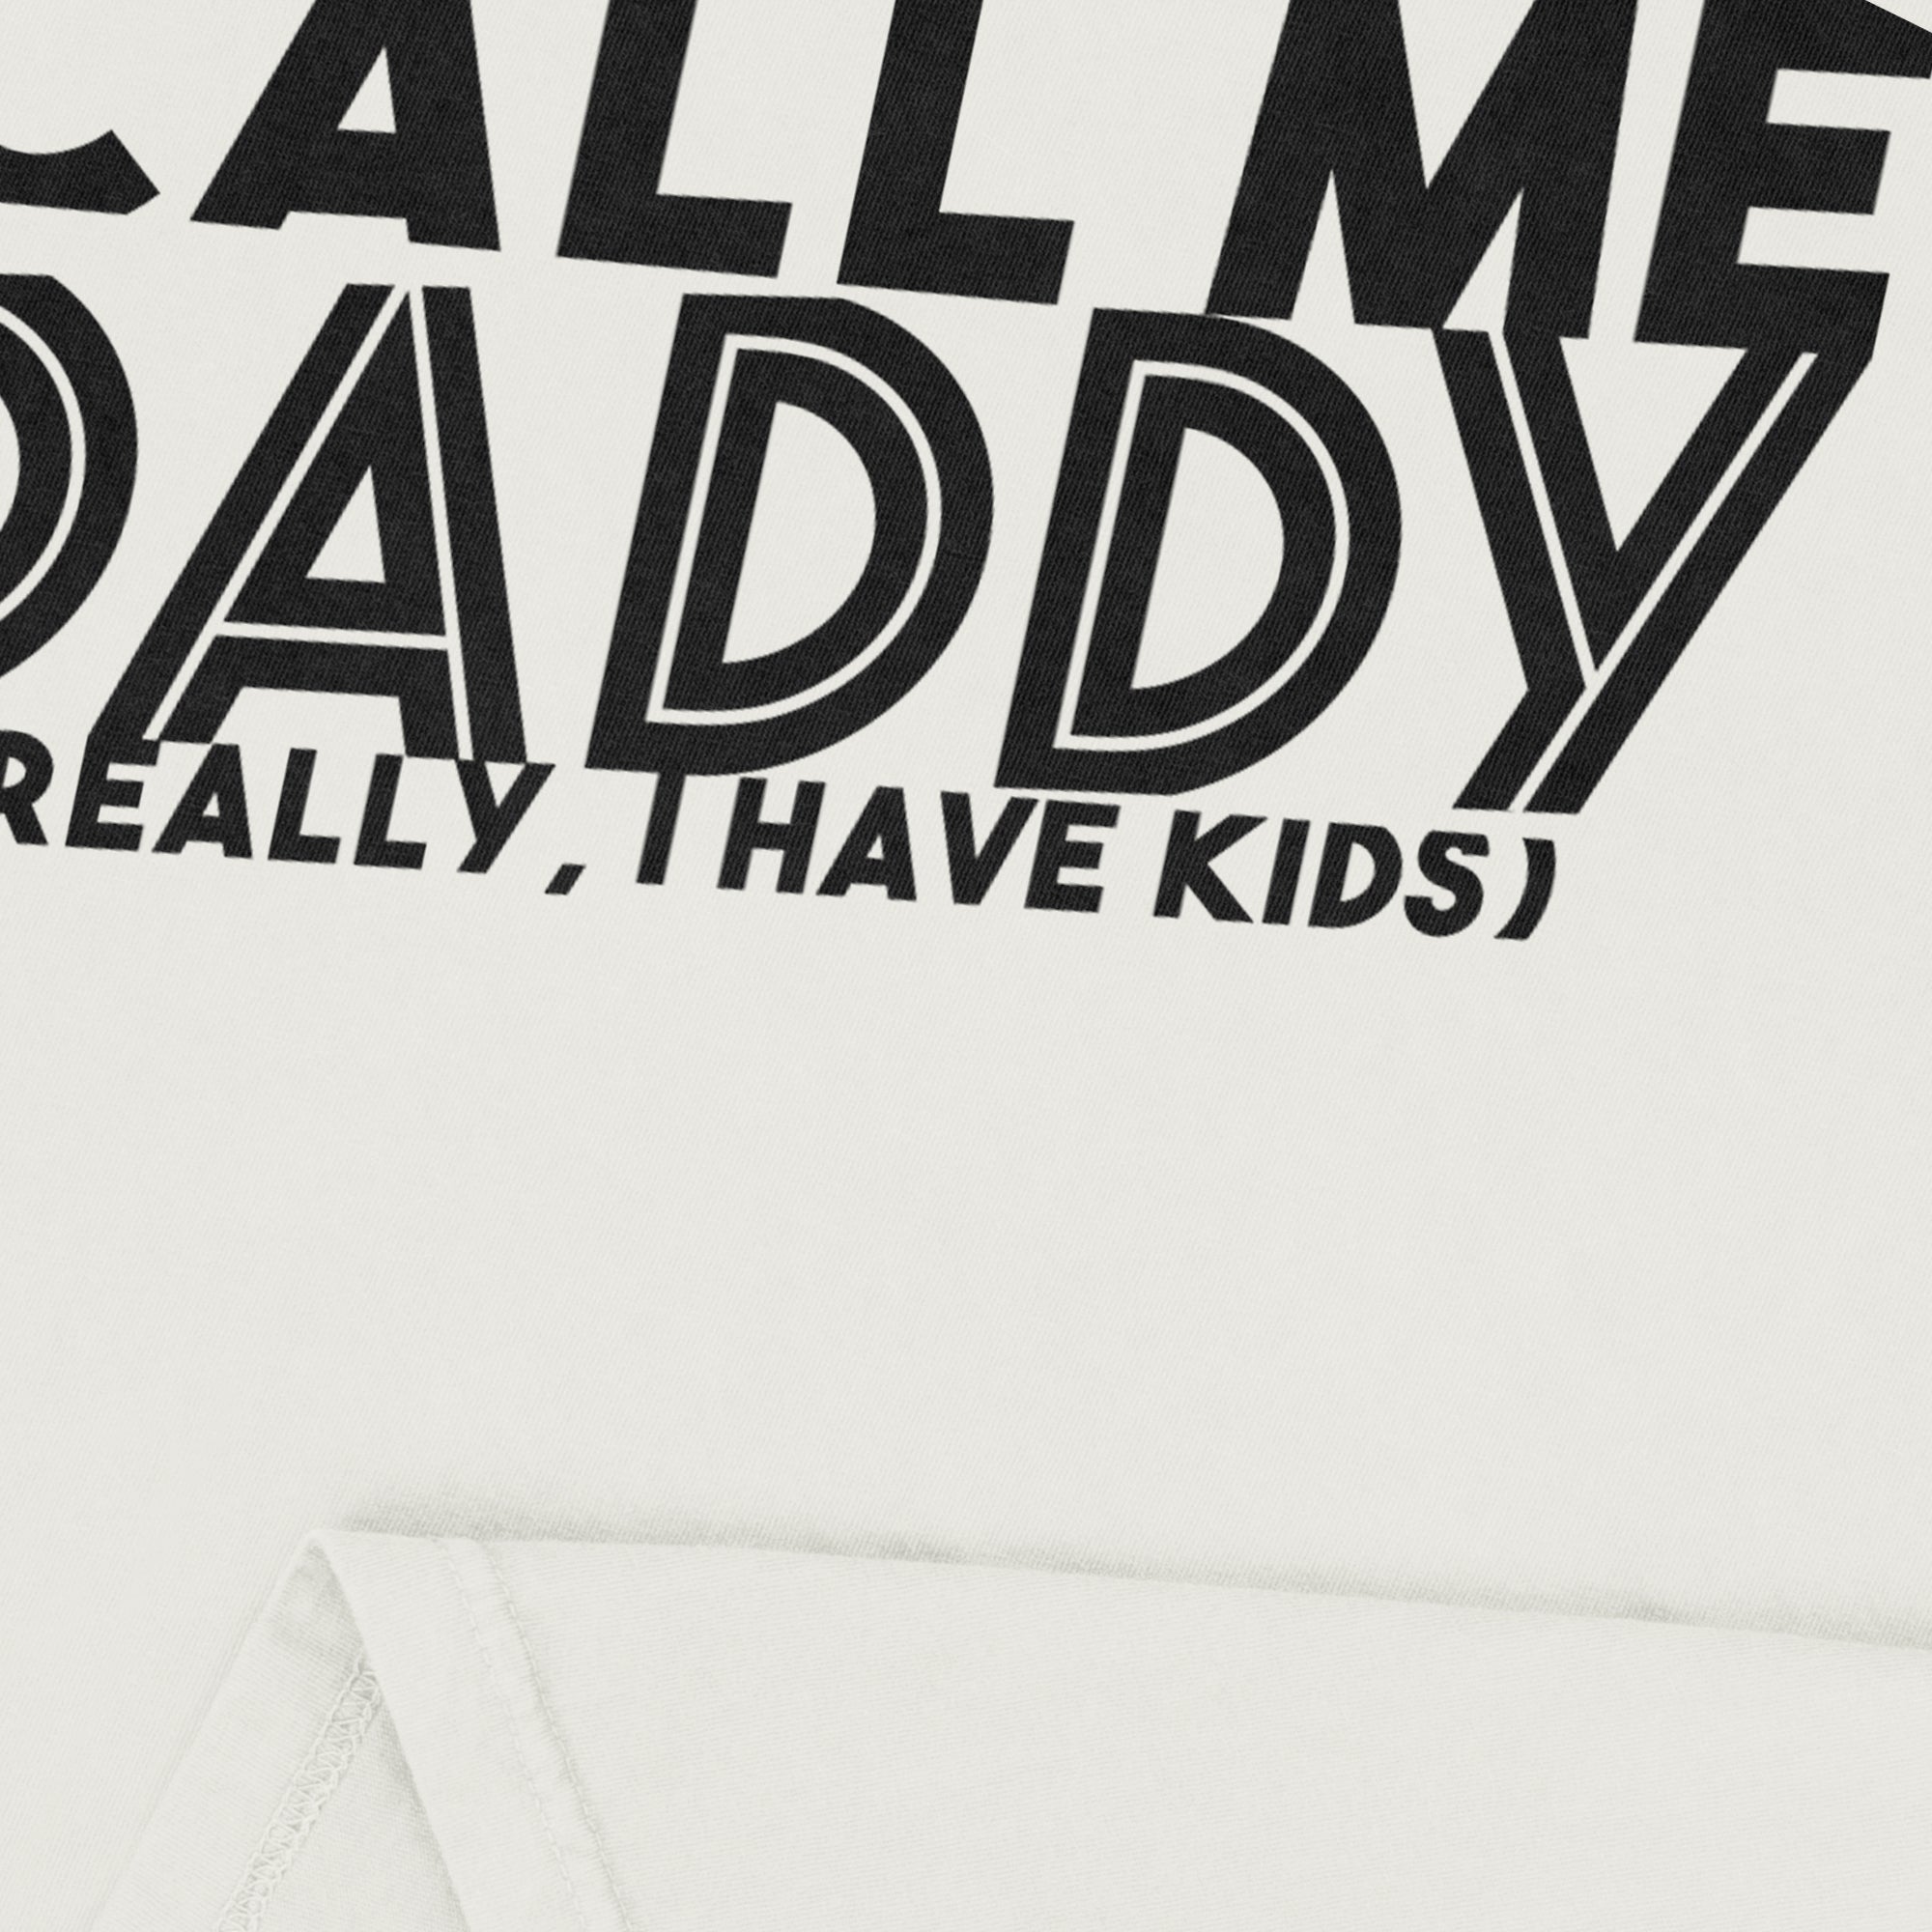 Call Me Daddy Garment-Dyed Tee - Stories You Can Wear